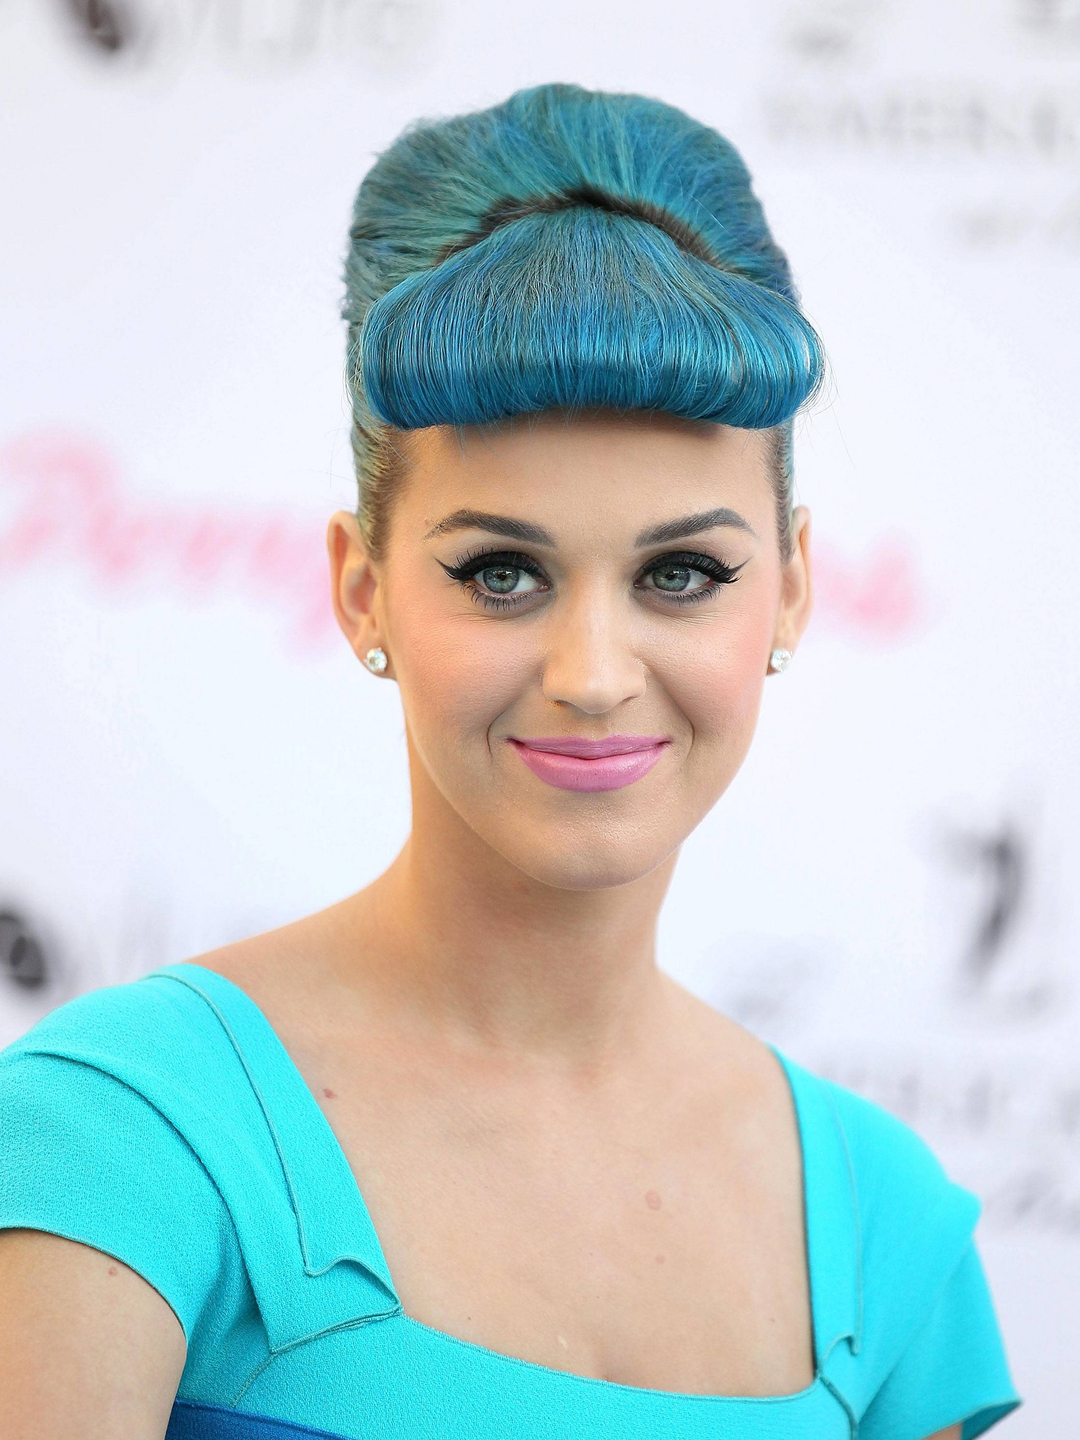 Katy Perry how old is she